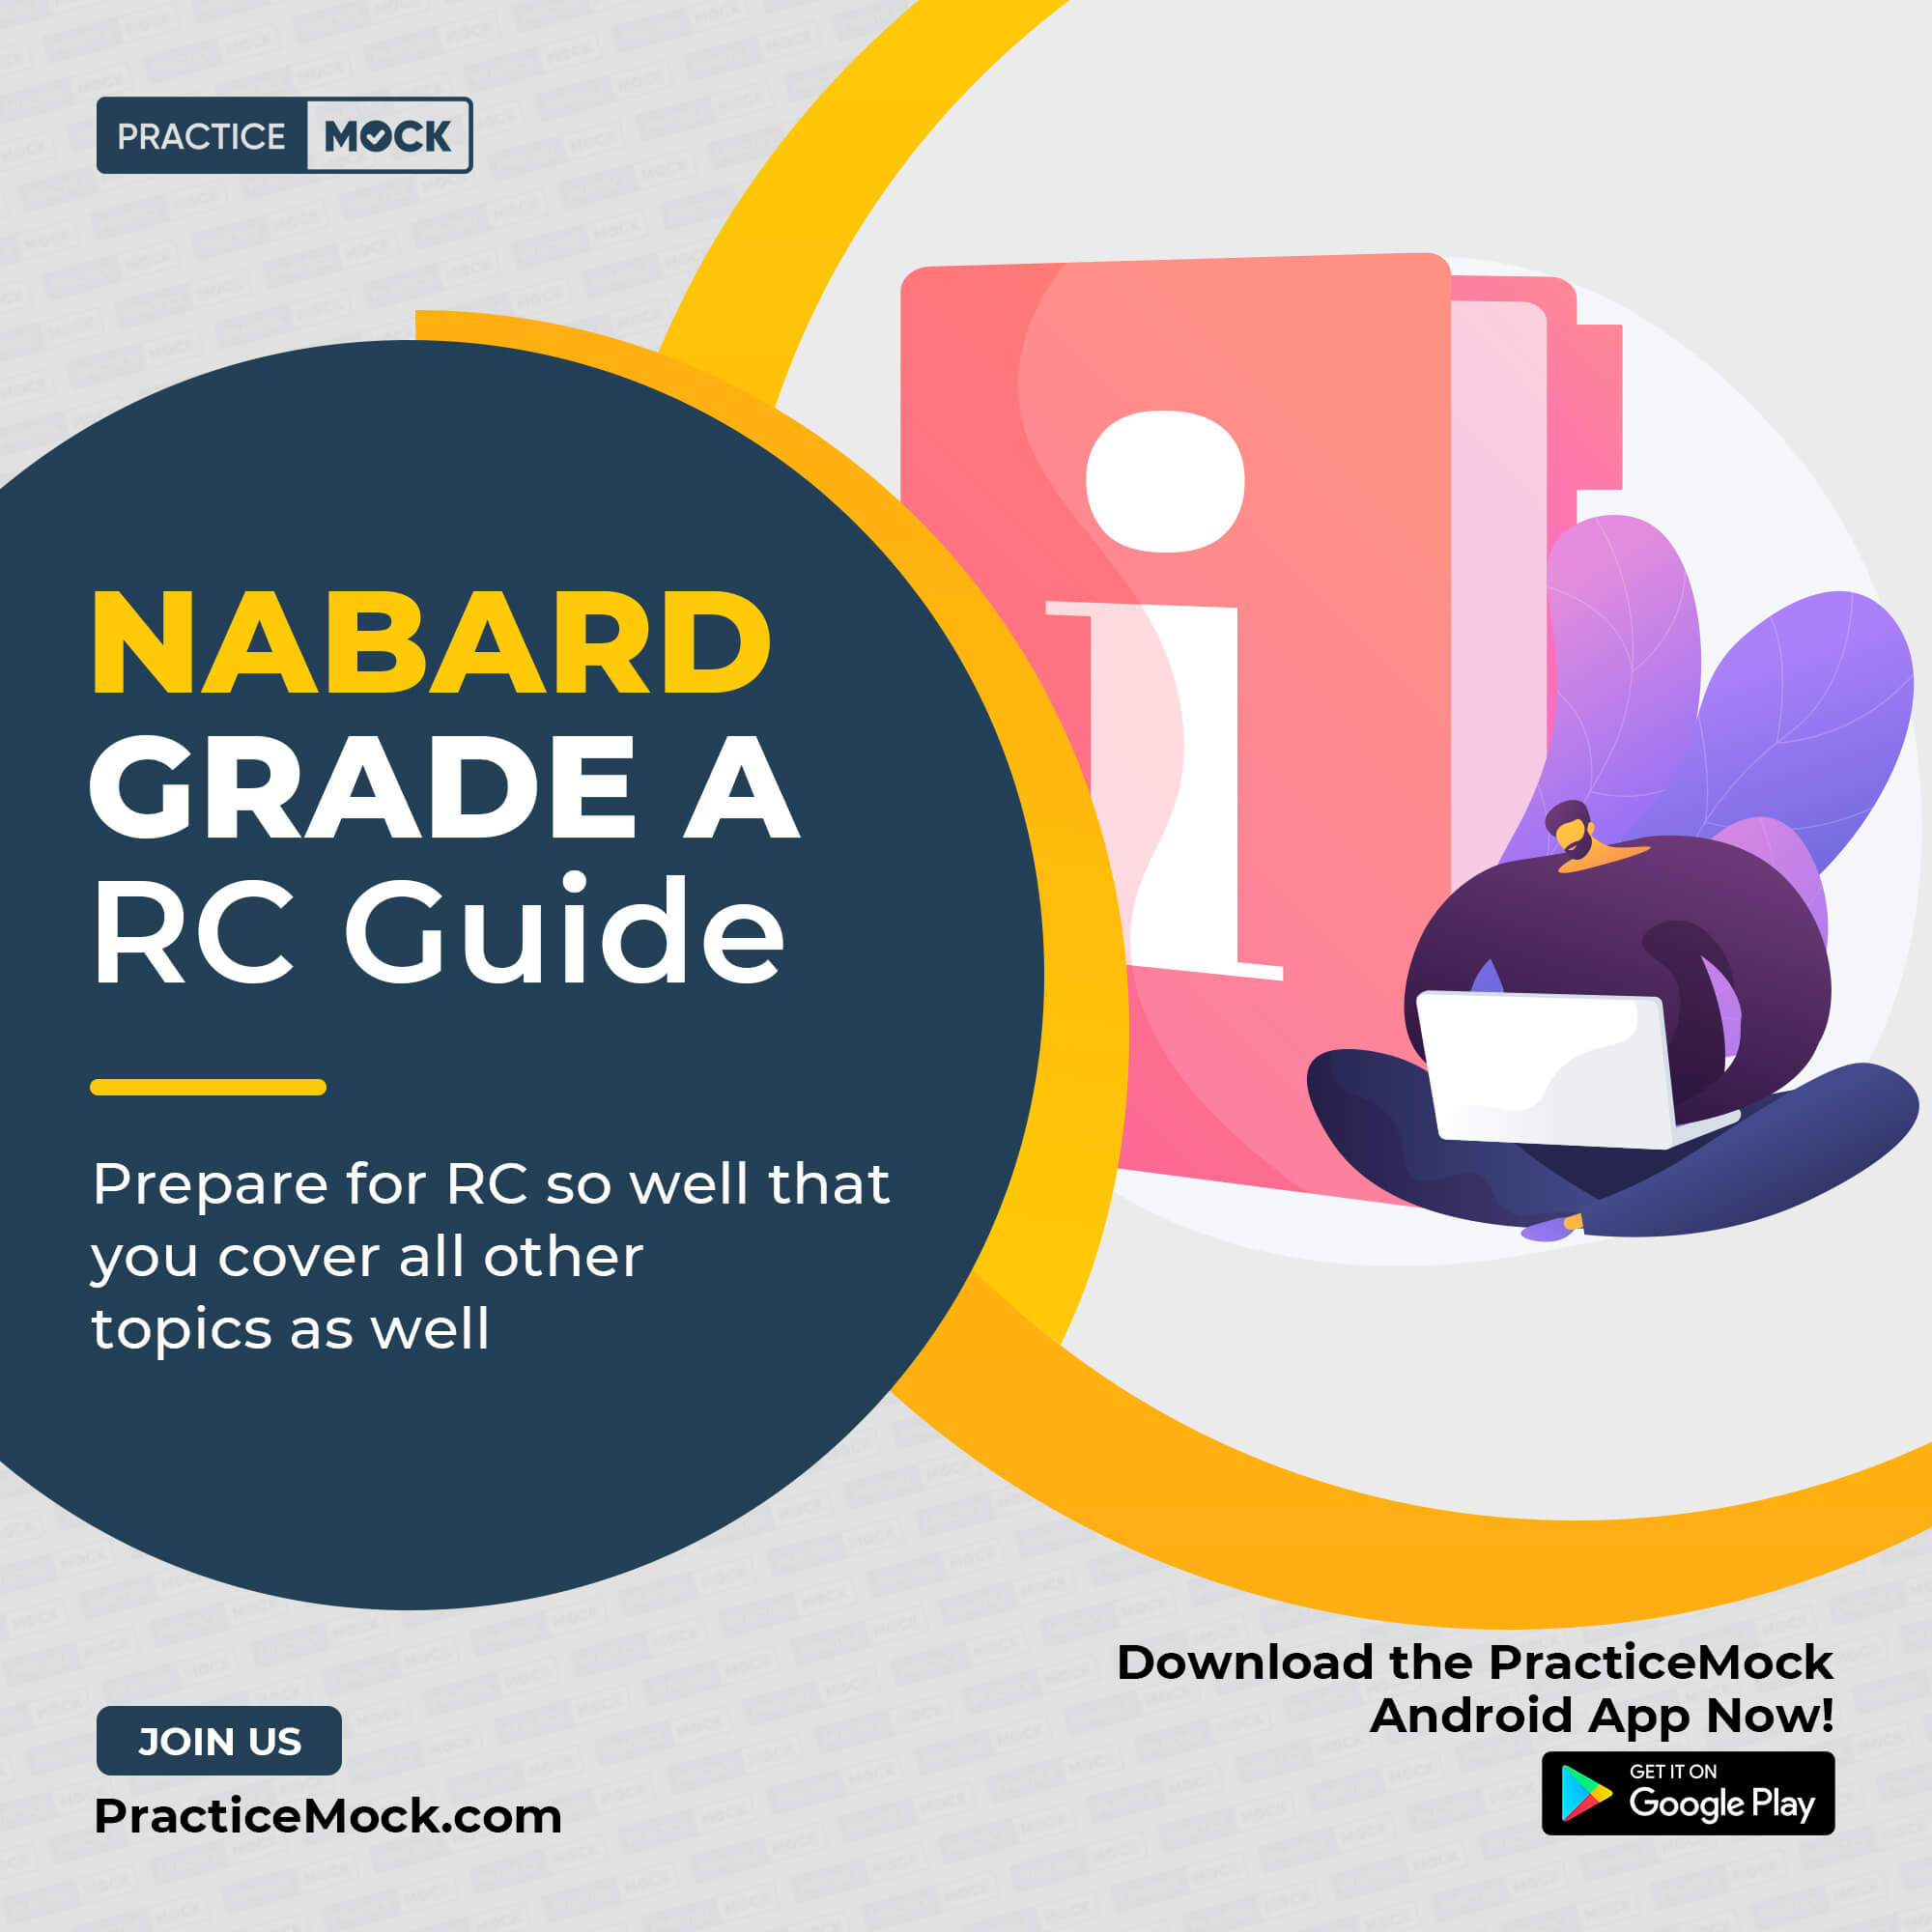 NABARD Grade A RC Guide